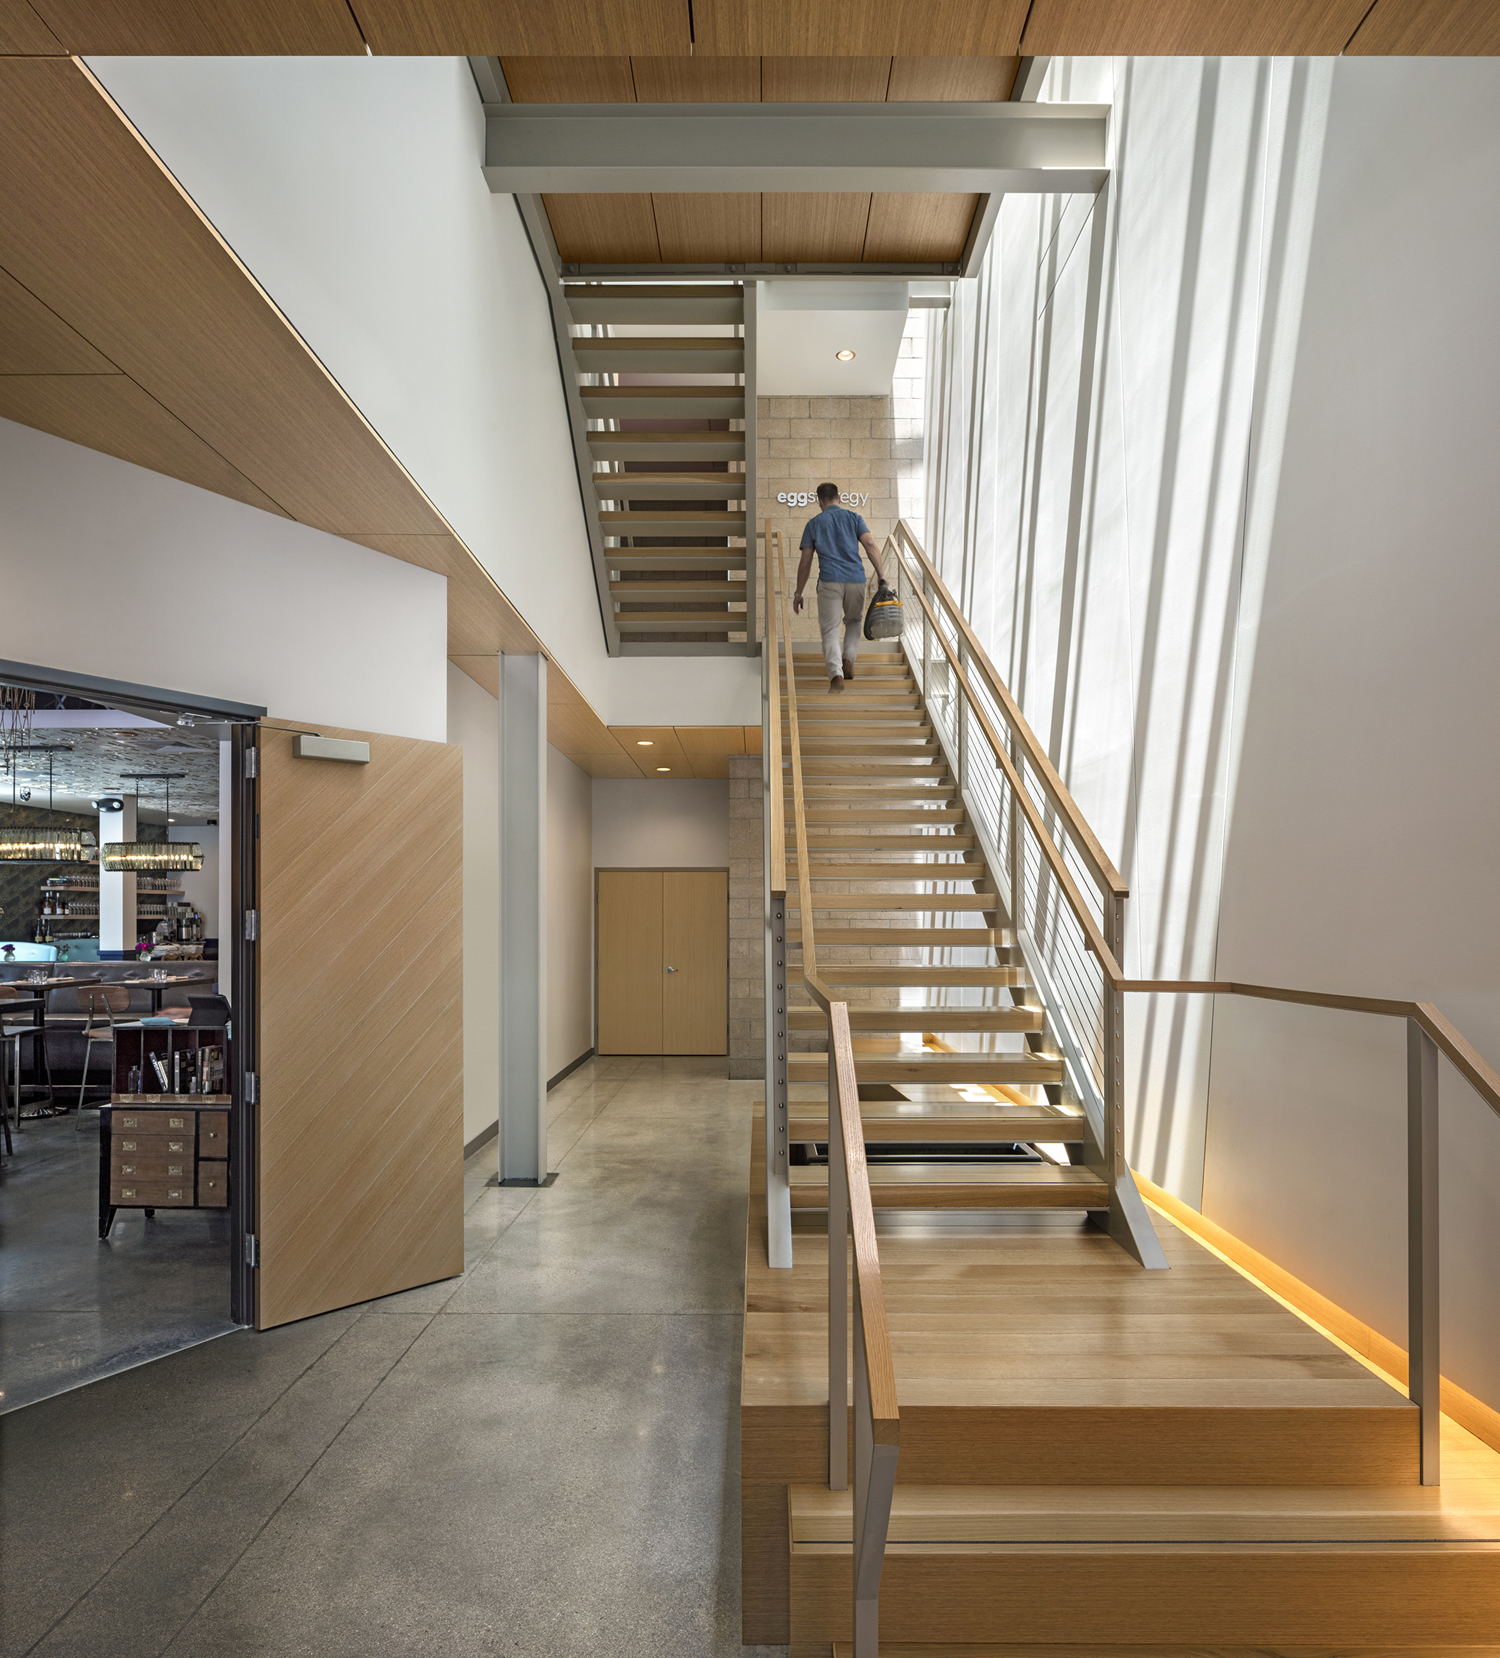 Working within the City of Boulder’s Downtown Urban Design Guidelines and zoning regulations, Arch11 optimized square footage and provided daylight deep into the building (photo by Raul Garcia).